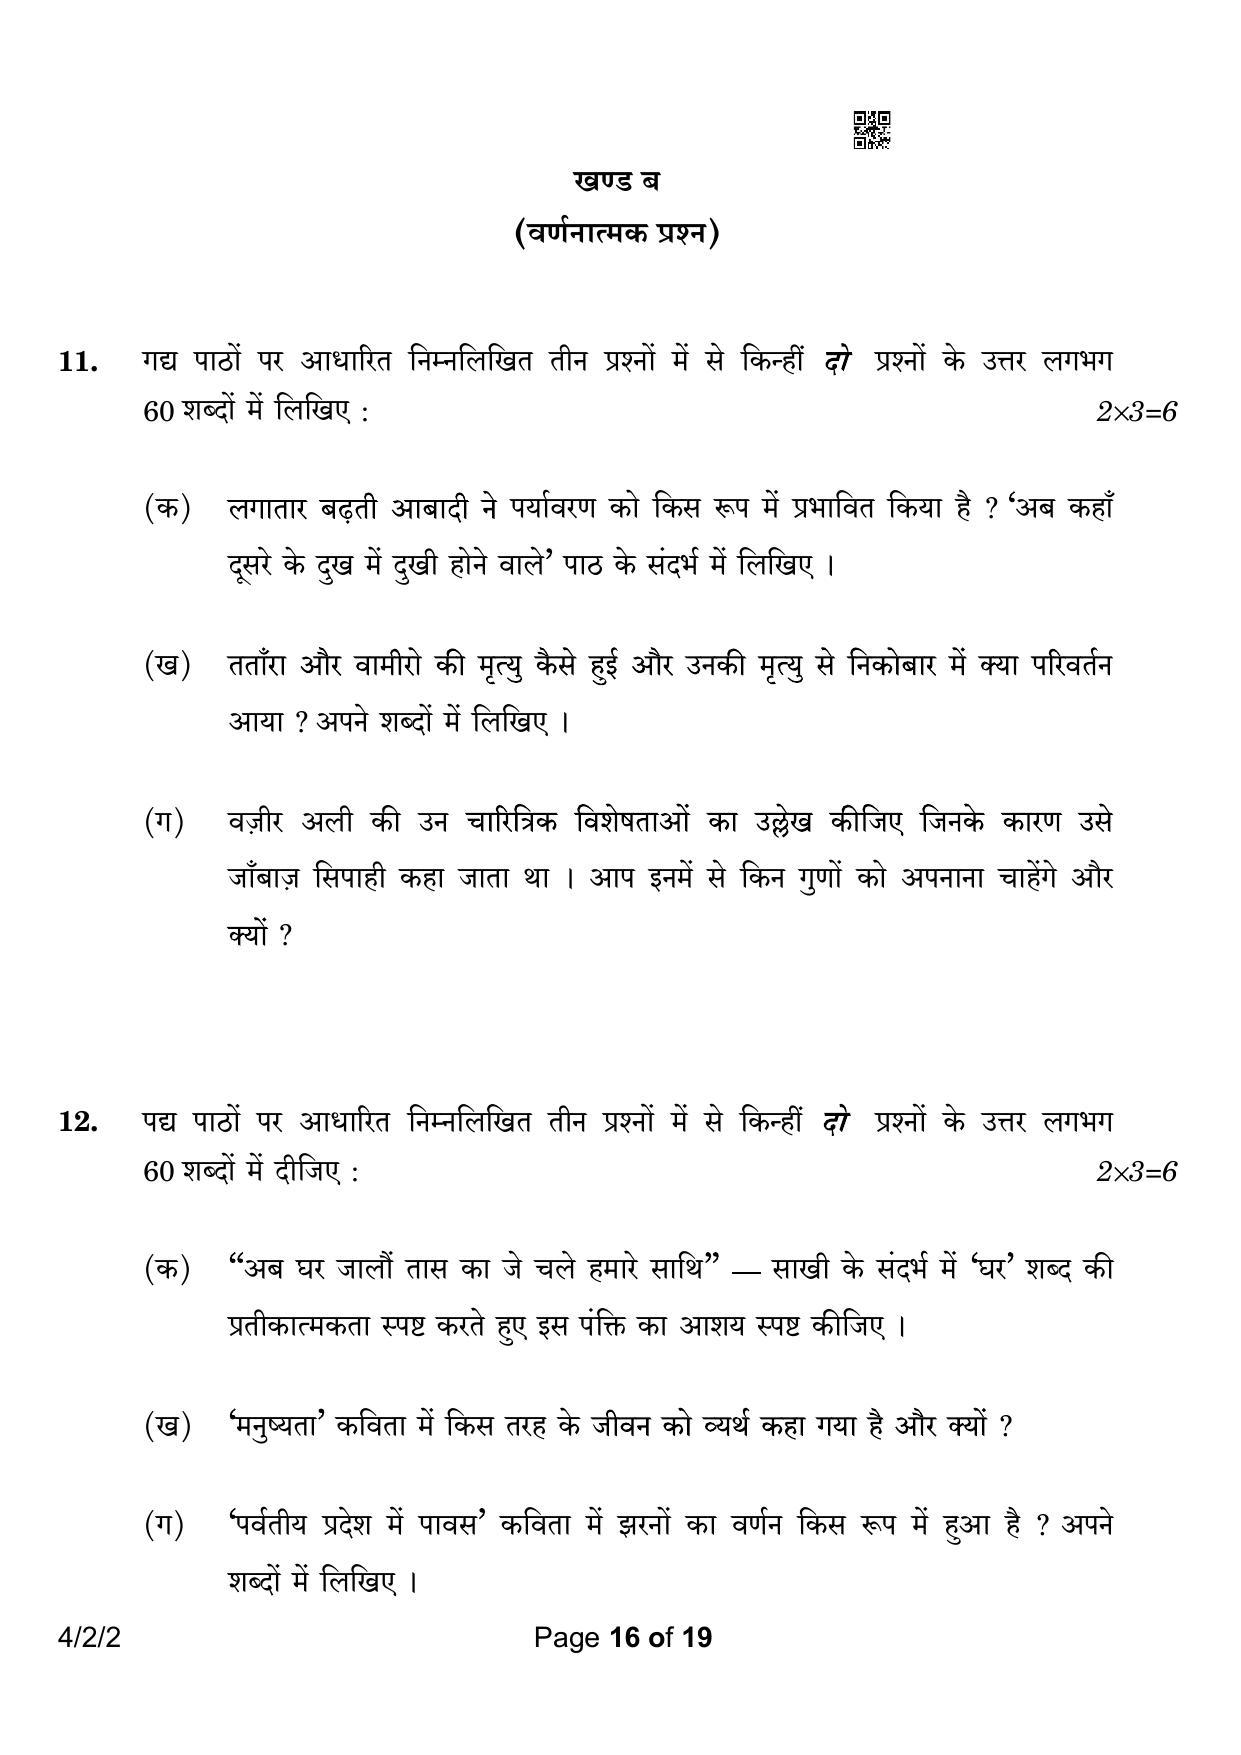 CBSE Class 10 4-2-2 Hindi B 2023 Question Paper - Page 16